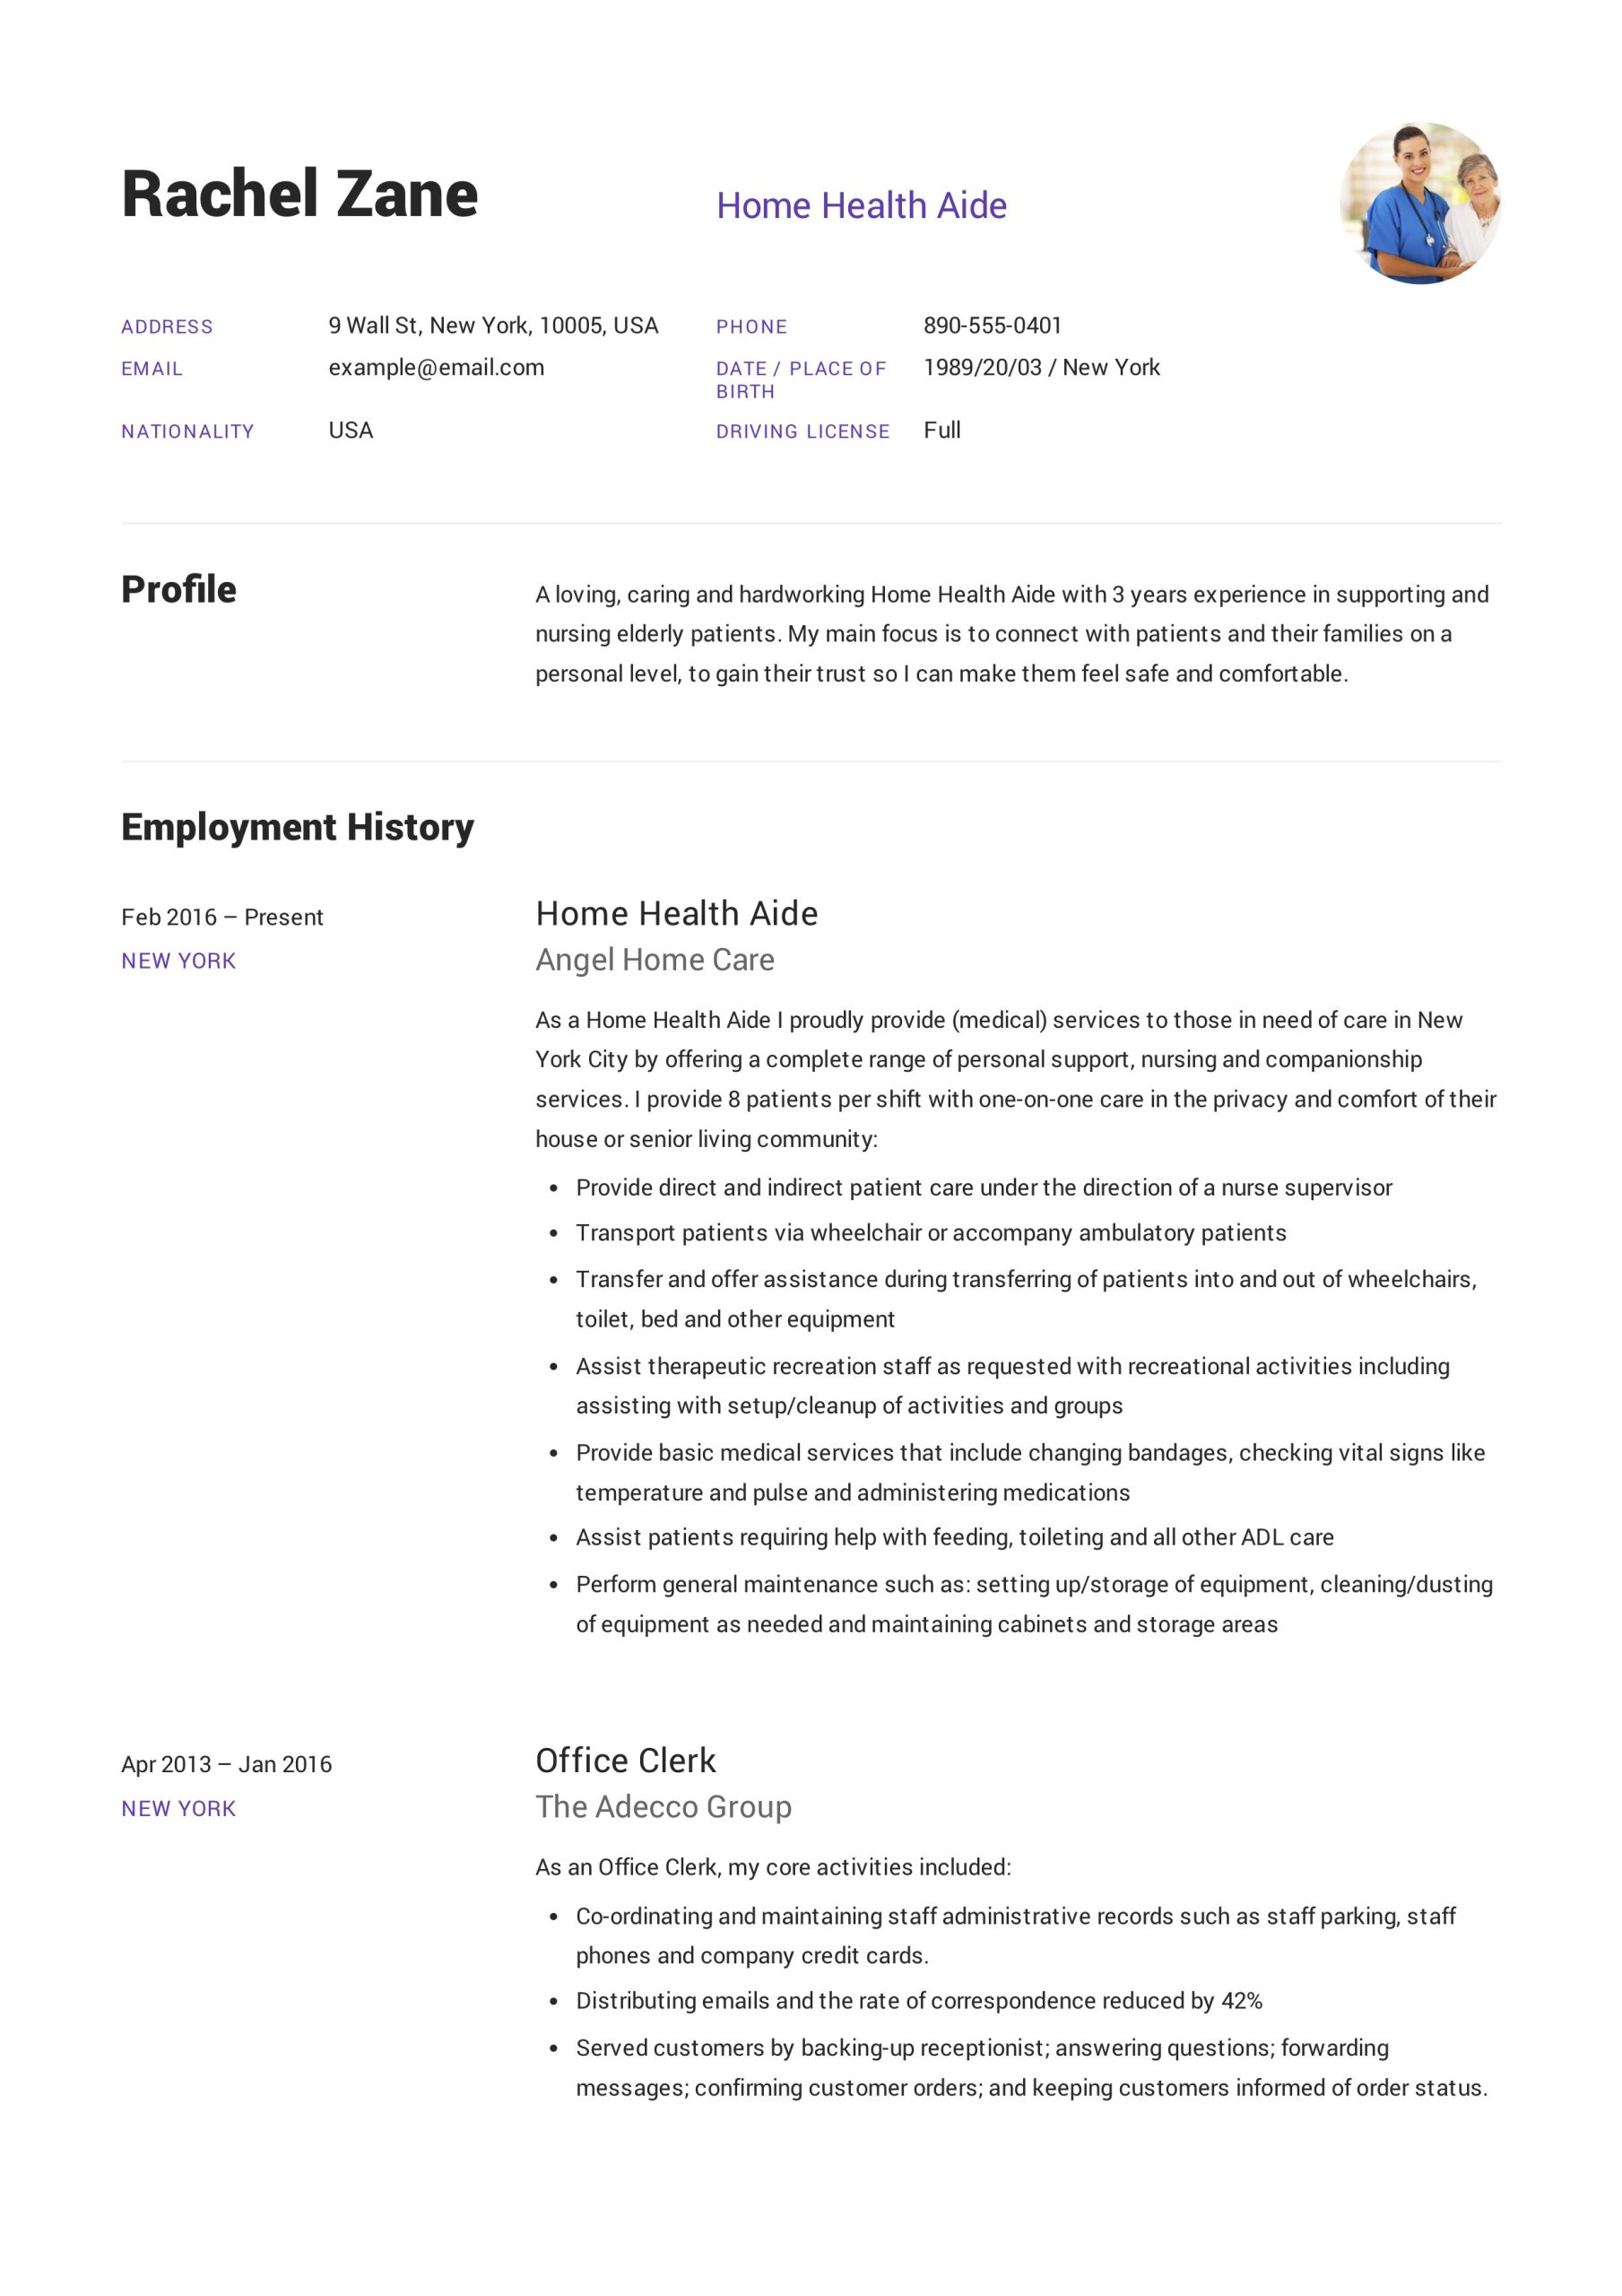 Home Health Intake Manager Resume Samples Home Health Aide Resume Guide 12 Examples Pdf